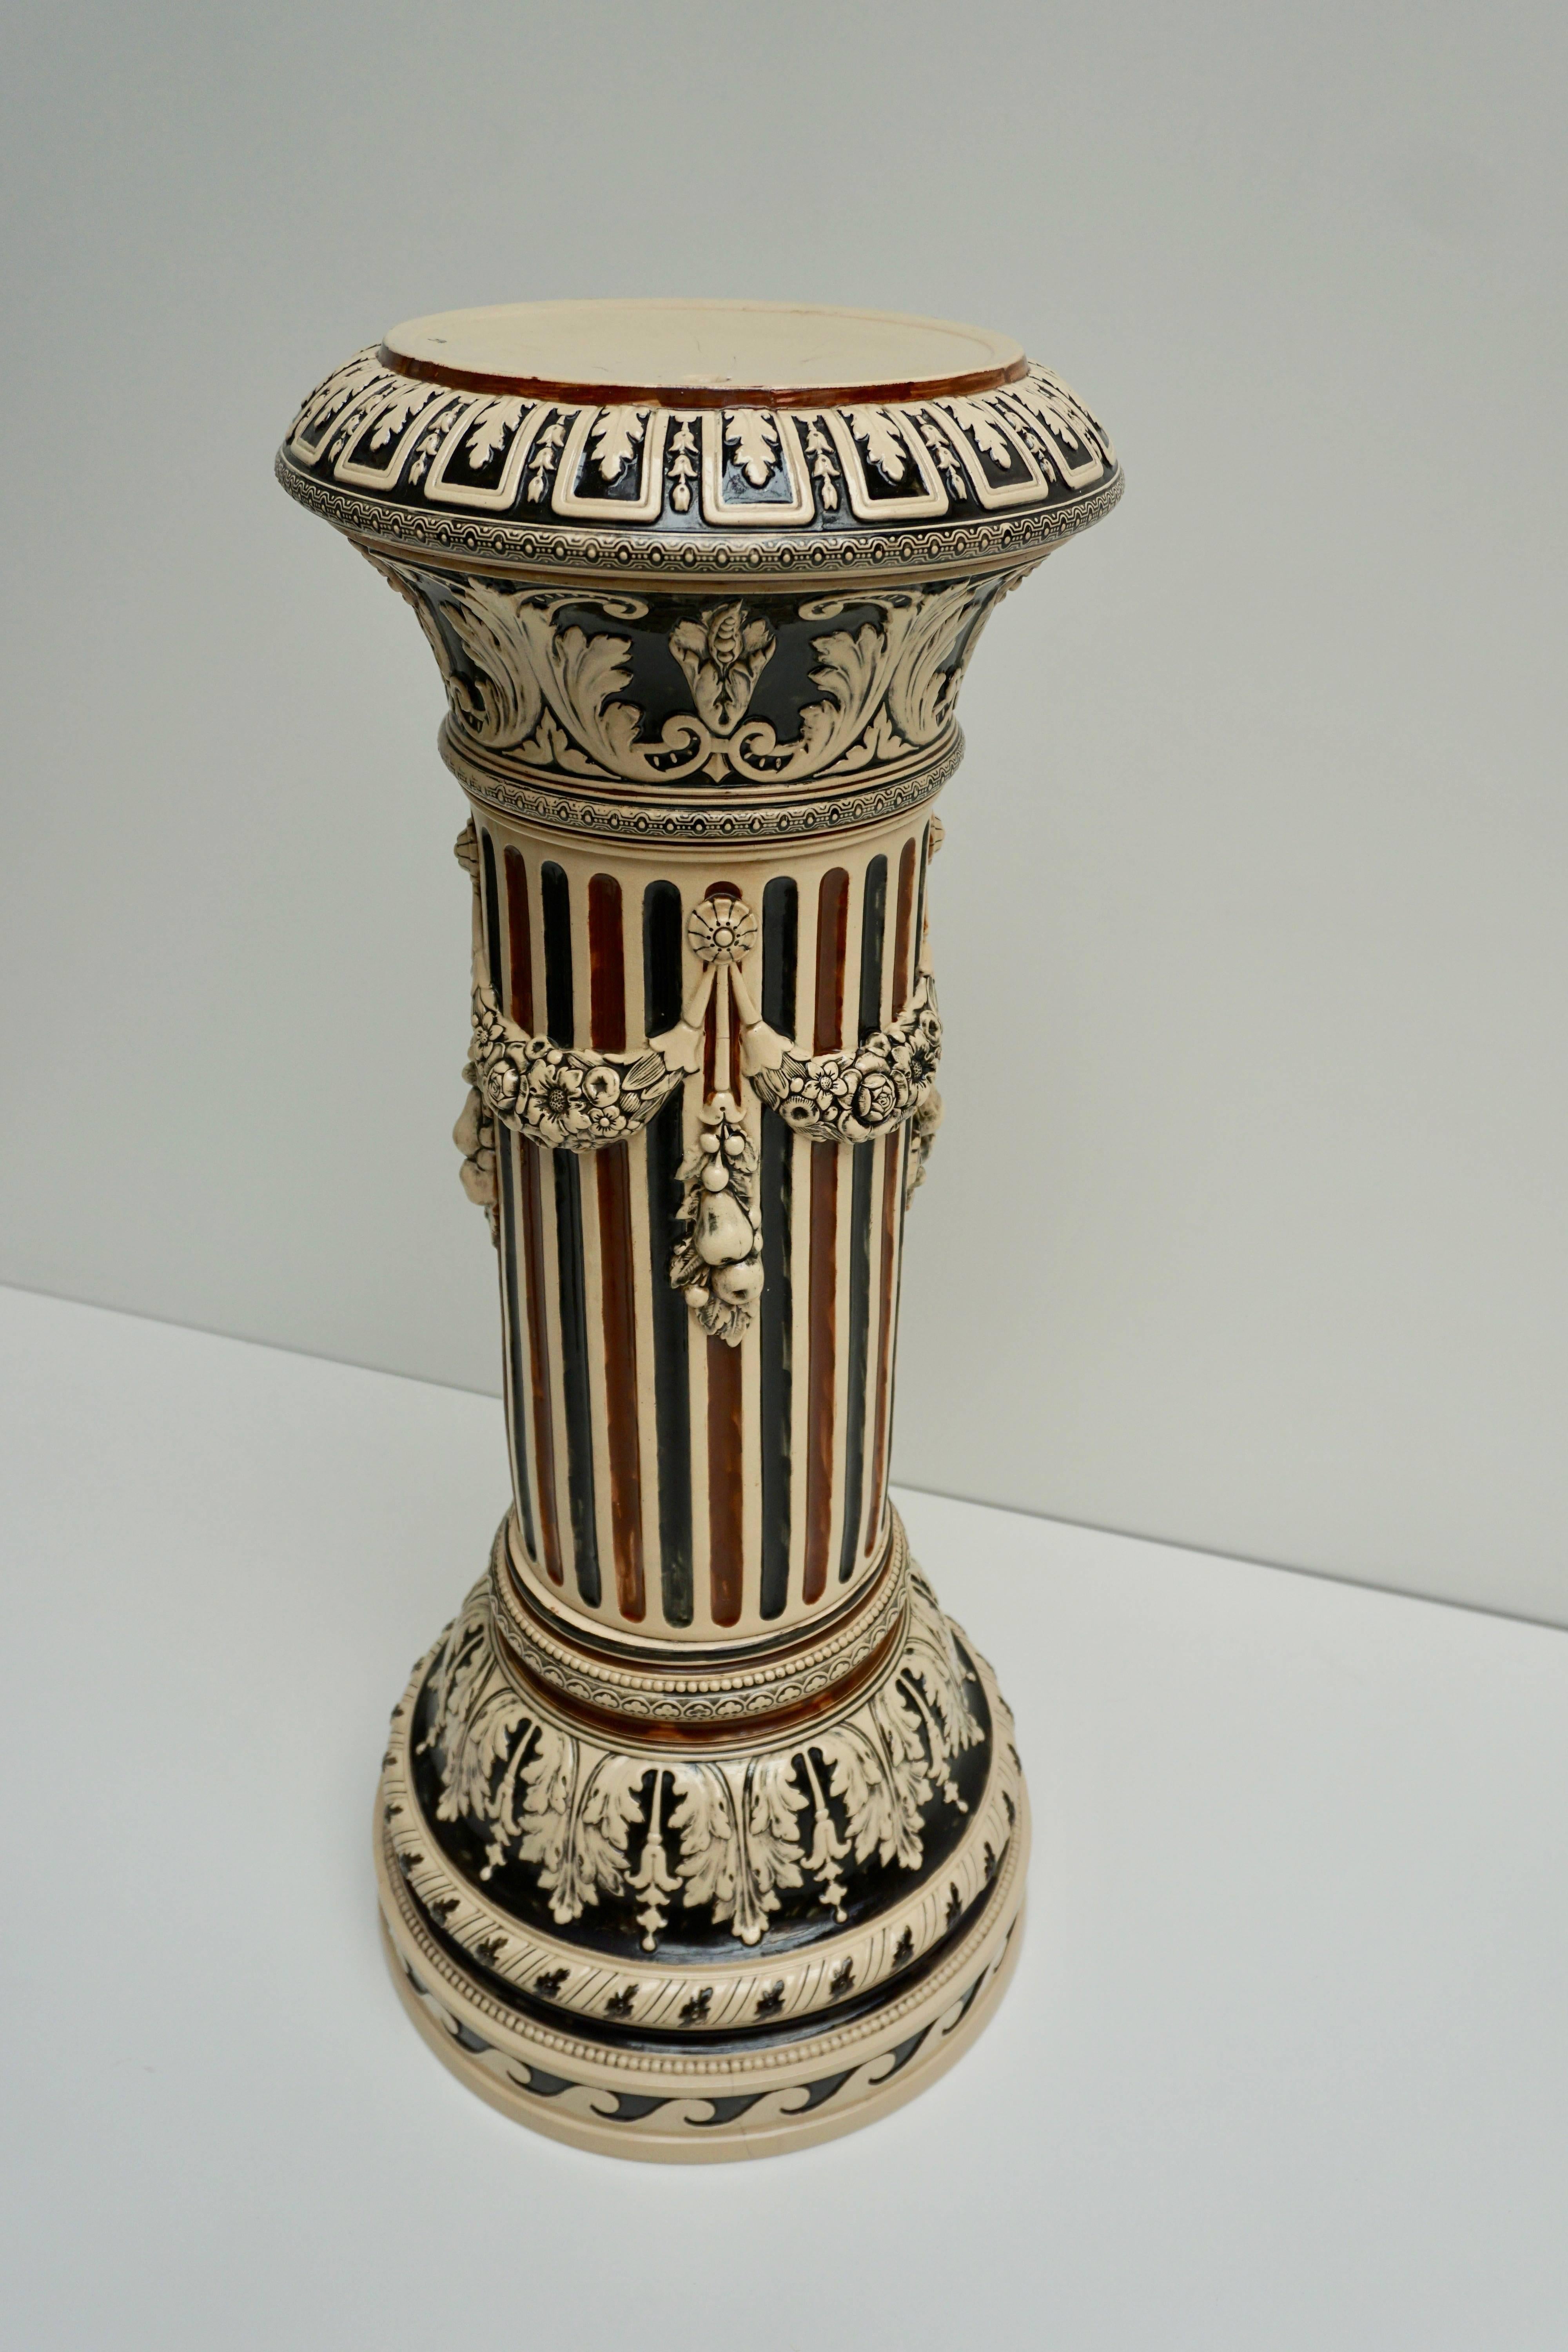 Two Italian ceramic pedestals with guirlanders.
Measures: 
Diameter base 38 cm and 42 cm .
Height 83 cm.
Weight 14 and 19 kg.
